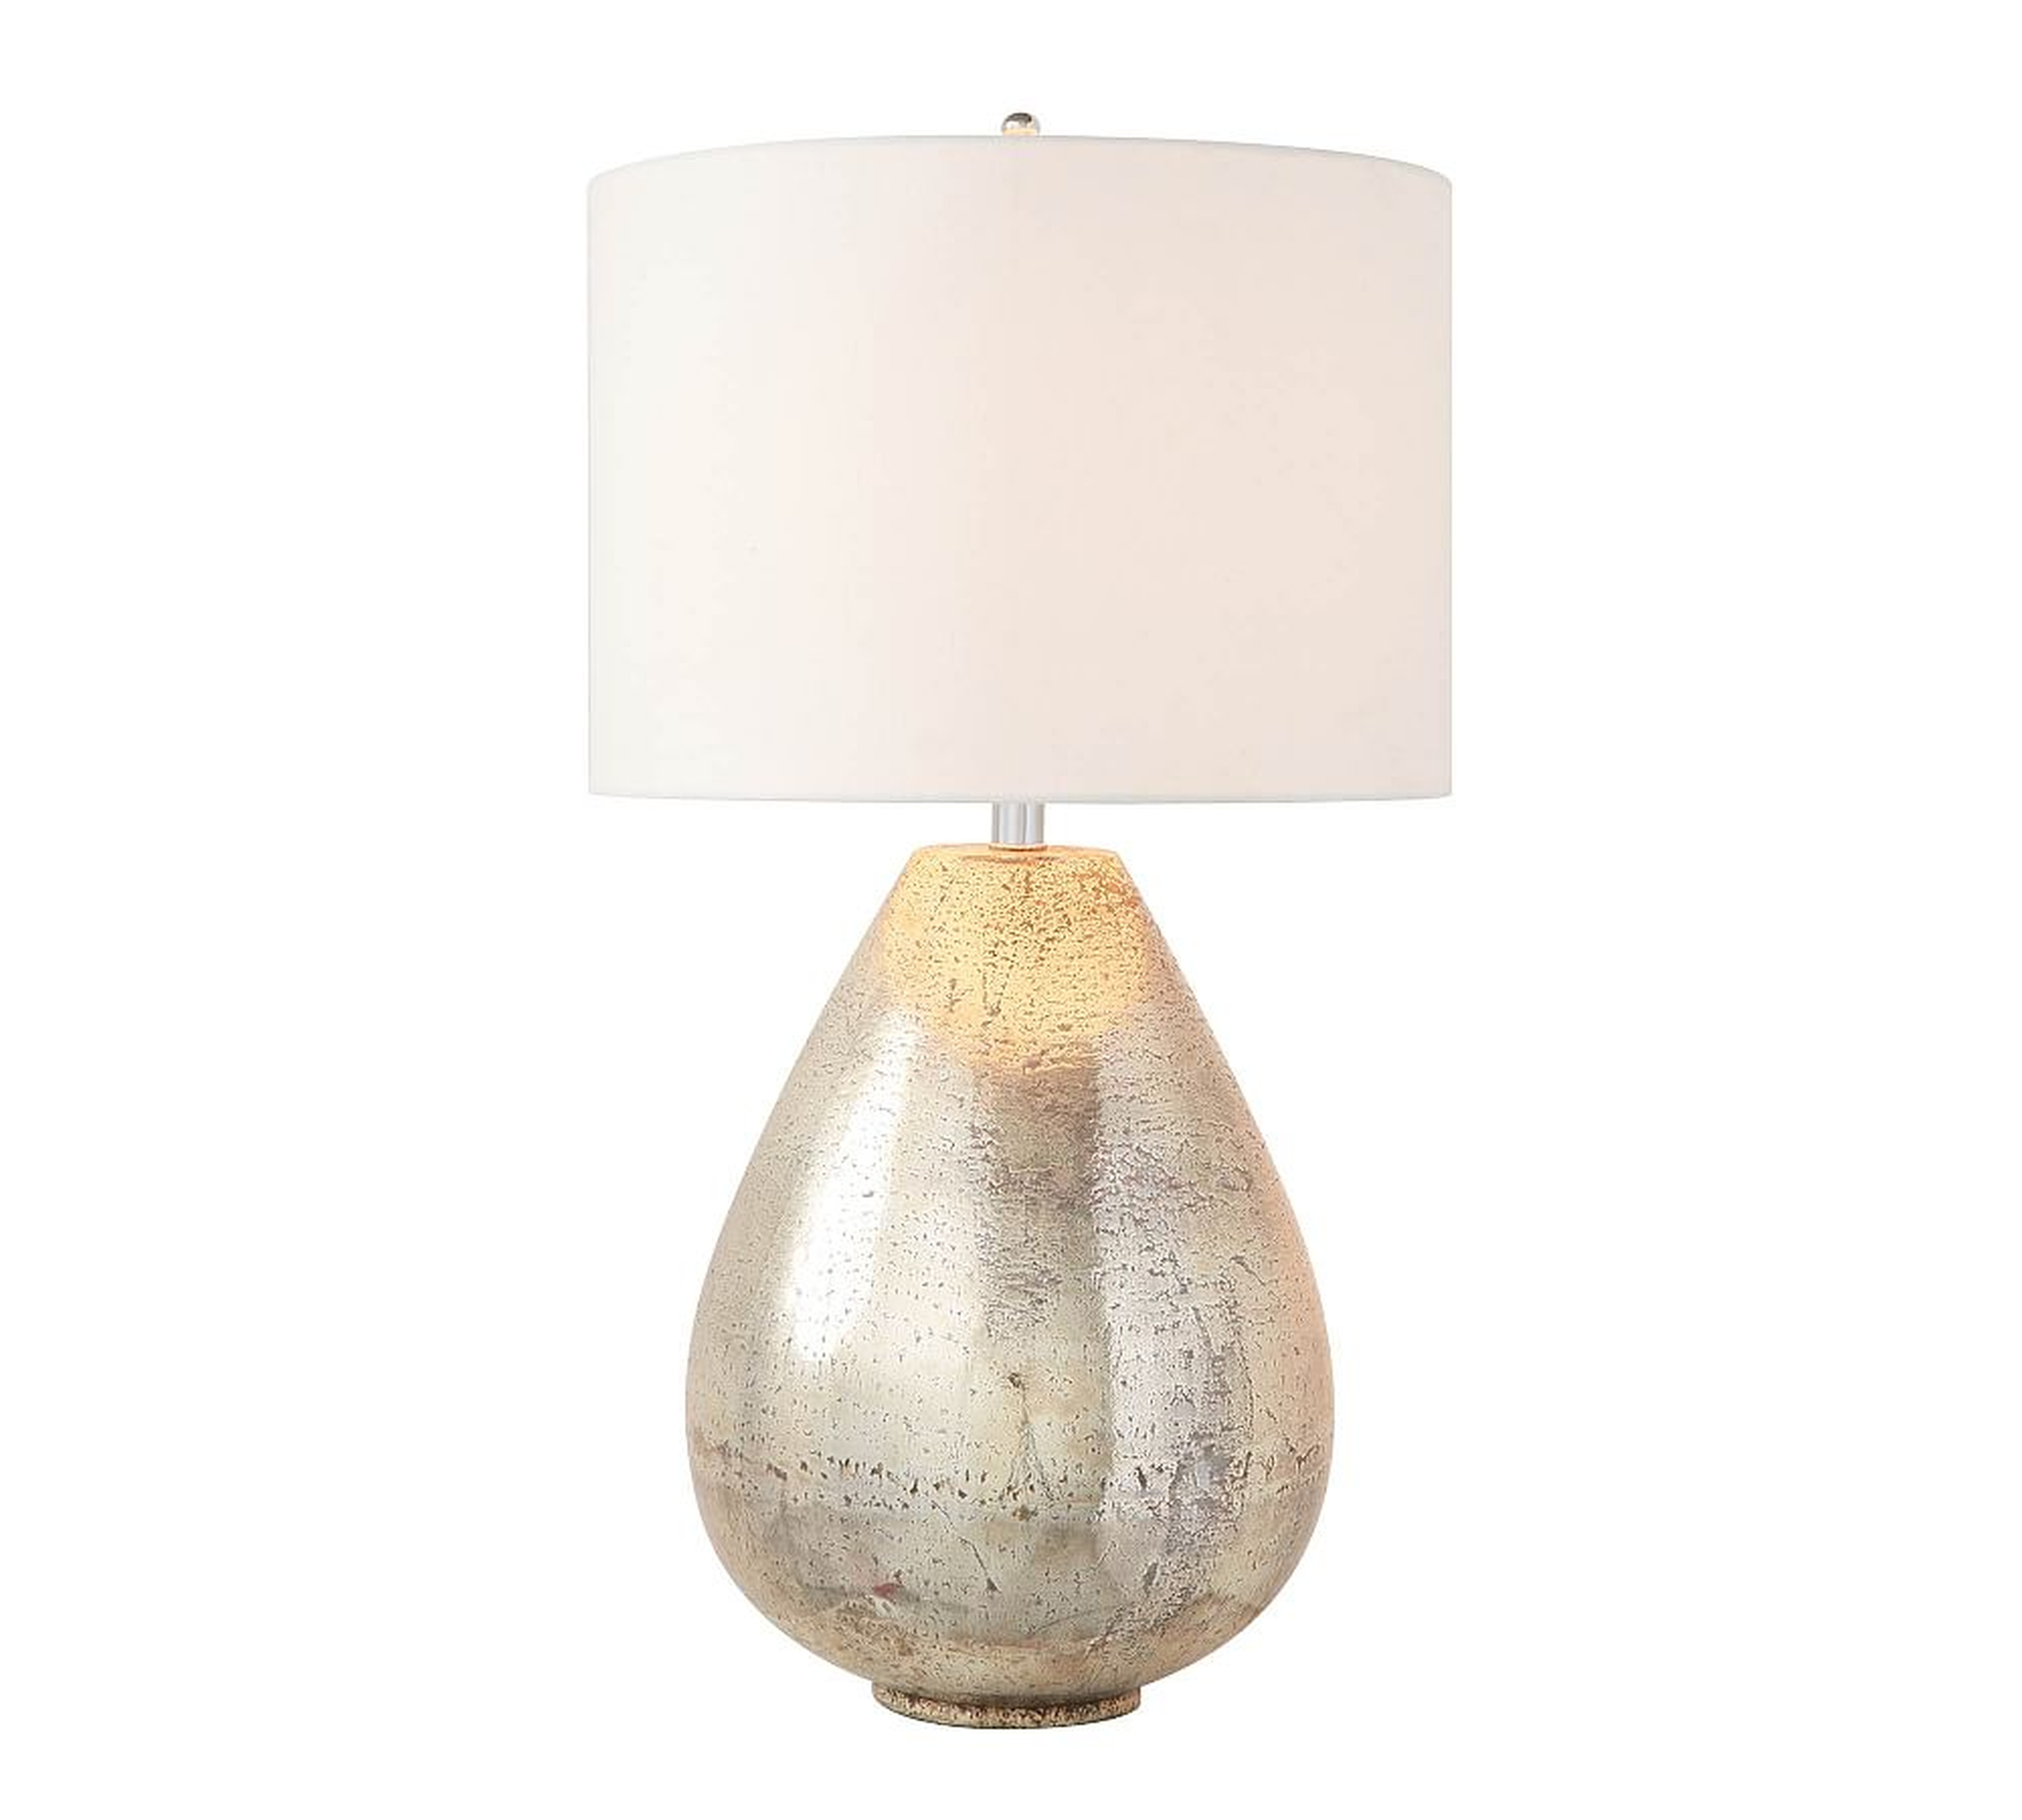 Mila Antique Mercury Table Lamp with Large Gallery Straight Sided Shade, 26", White - Pottery Barn